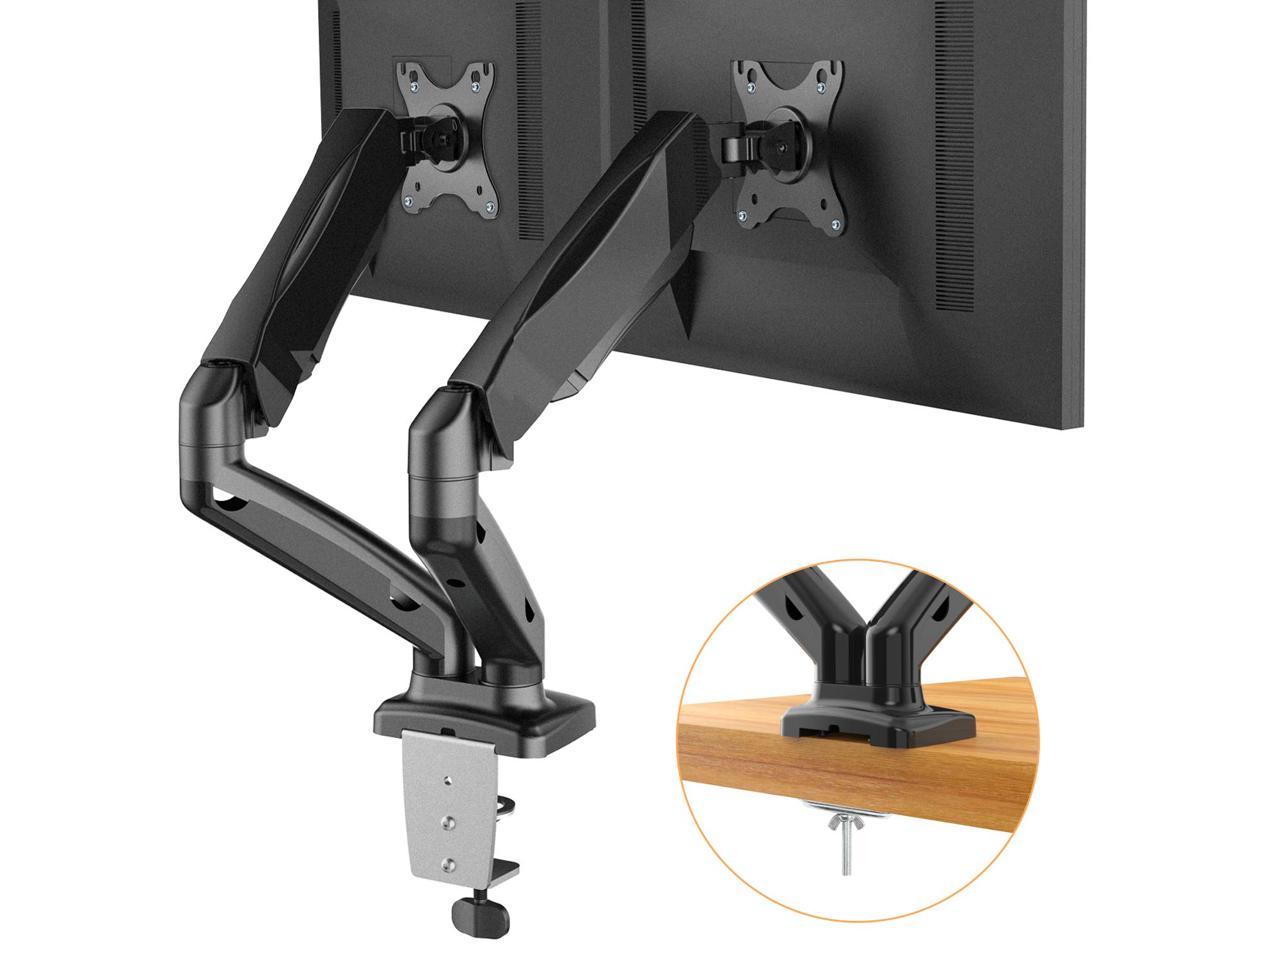 HUANUO Dual Arm Monitor Stand Adjustable Gas Spring Computer Desk Mount  Bracket with C Clamp/Grommet Mounting Base for 13 to 27 Inch Computer  Screens Each Arm Holds up to 17.6lbs